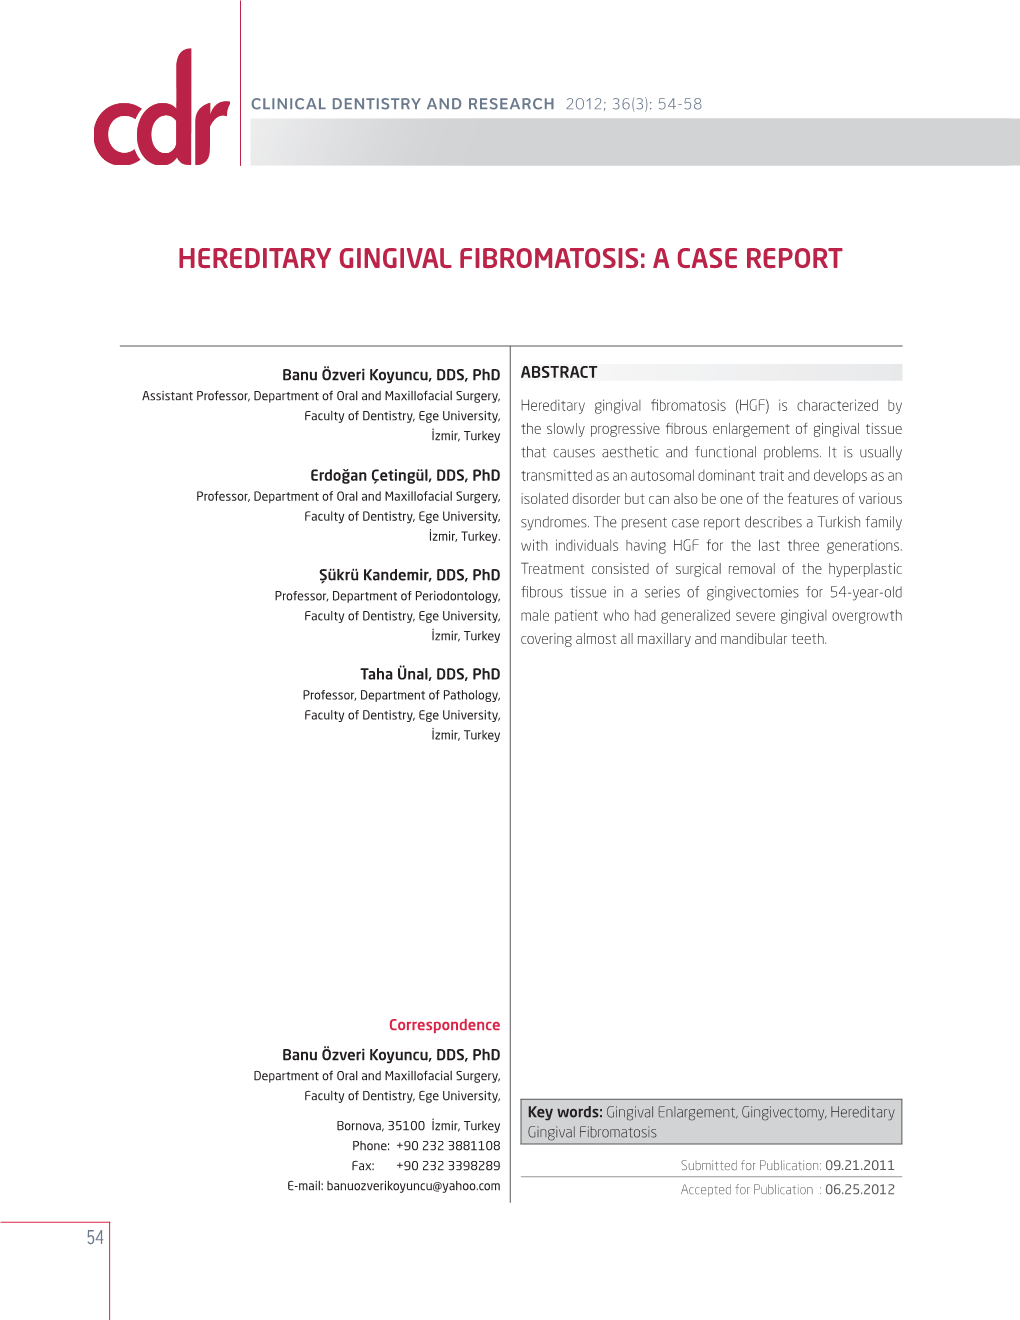 Hereditary Gingival Fibromatosis: a Case Report